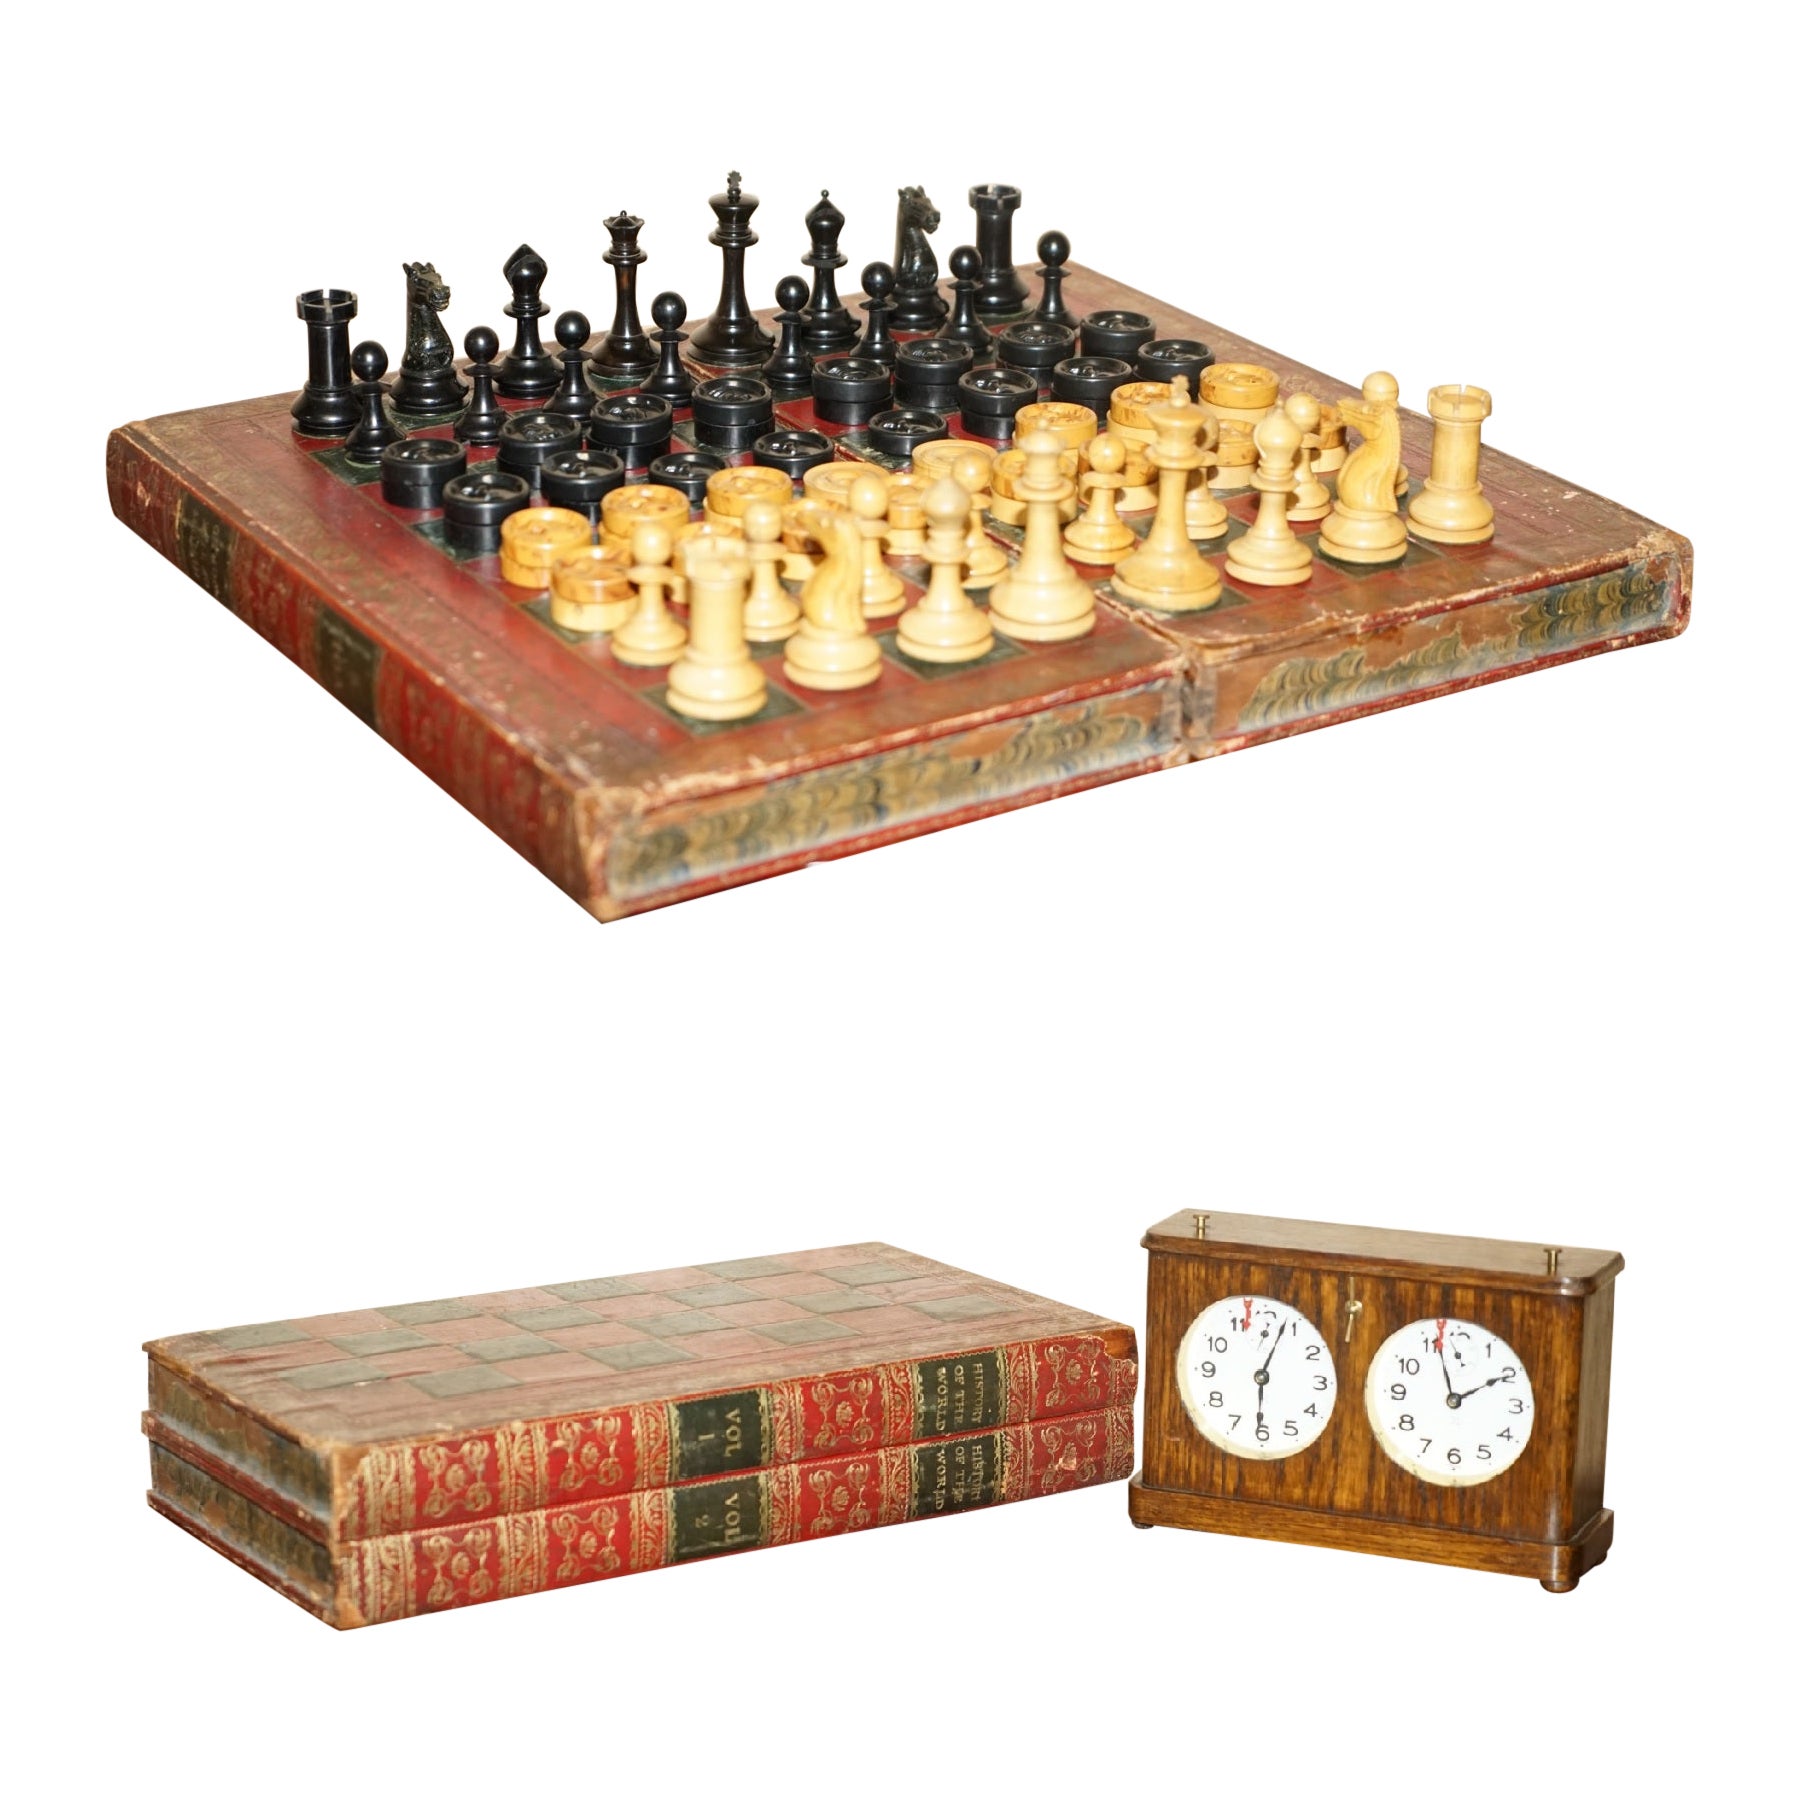 High Victorian Game Boards